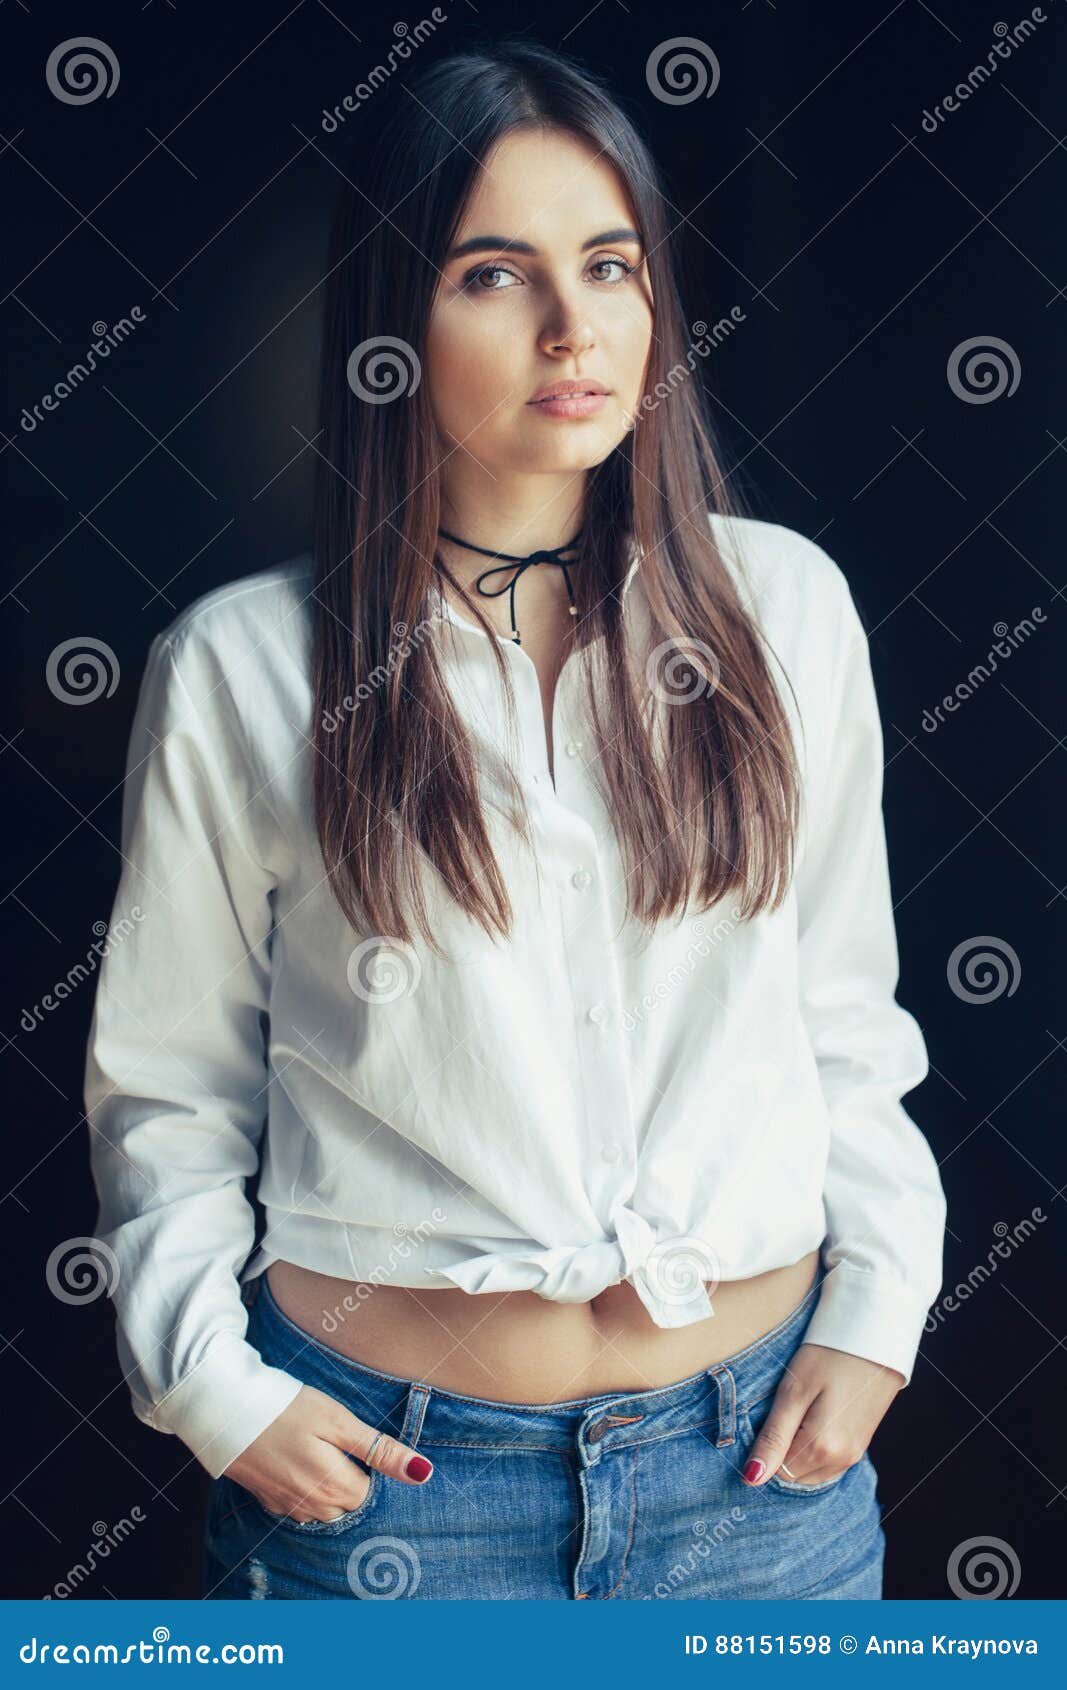 Caucasian Brunette Young Beautiful Girl Woman Model With Long Dark Hair And Brown Eyes In White Shirt Tied In A Knot Blue Jeans Stock Photo Image Of Model Authentic